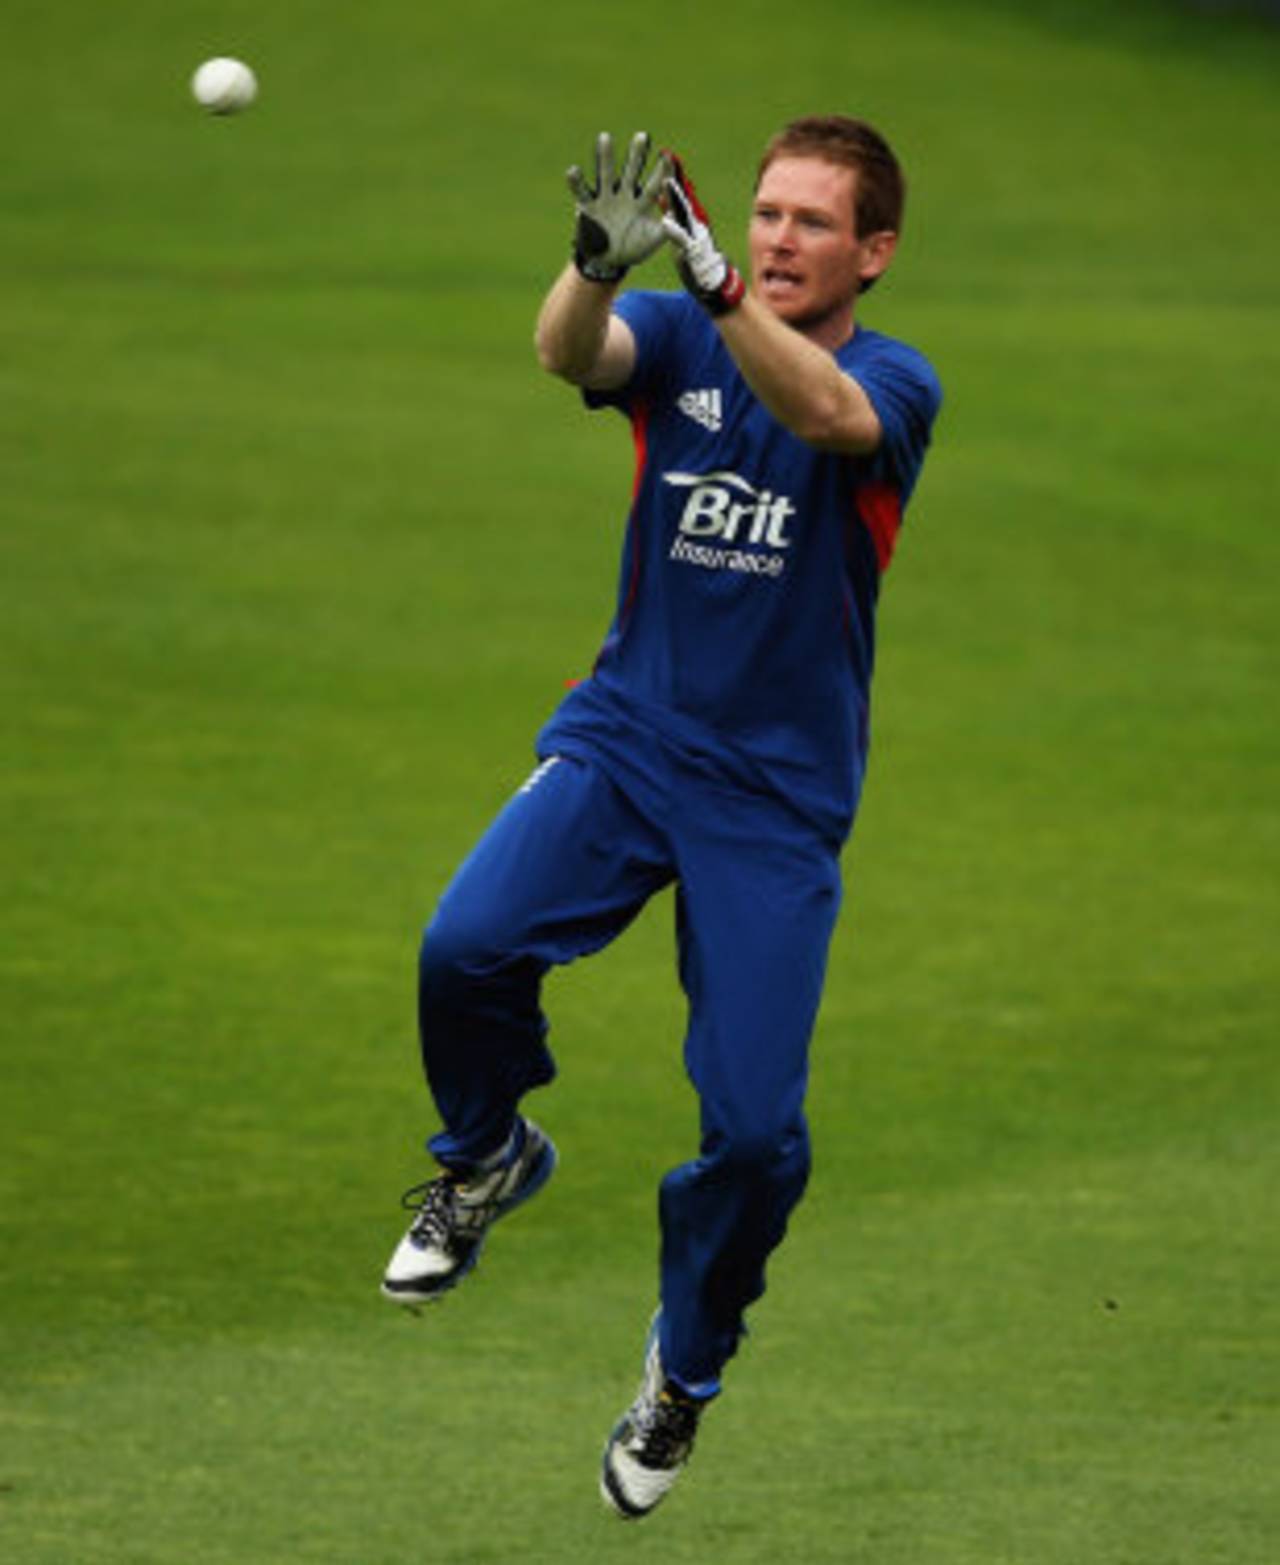 Eoin Morgan takes part in some fielding practice, London, June 18, 2013